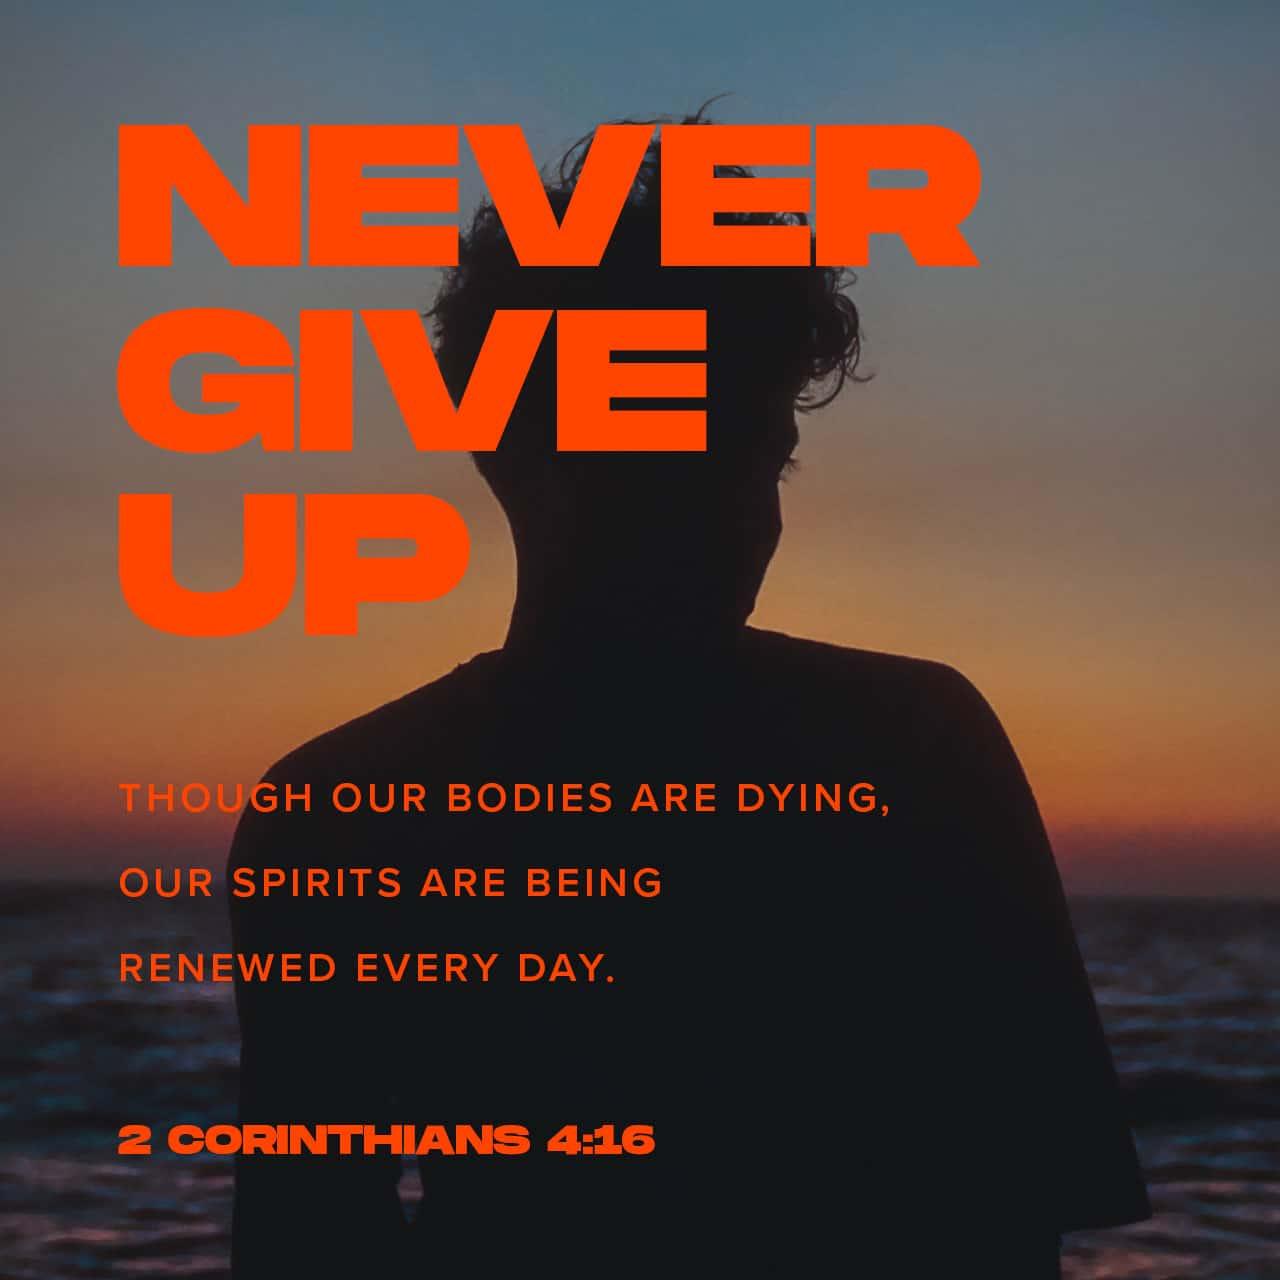 Bible Verse of the Day - day 91 - image 56510 (2 Corinthians 4:16)